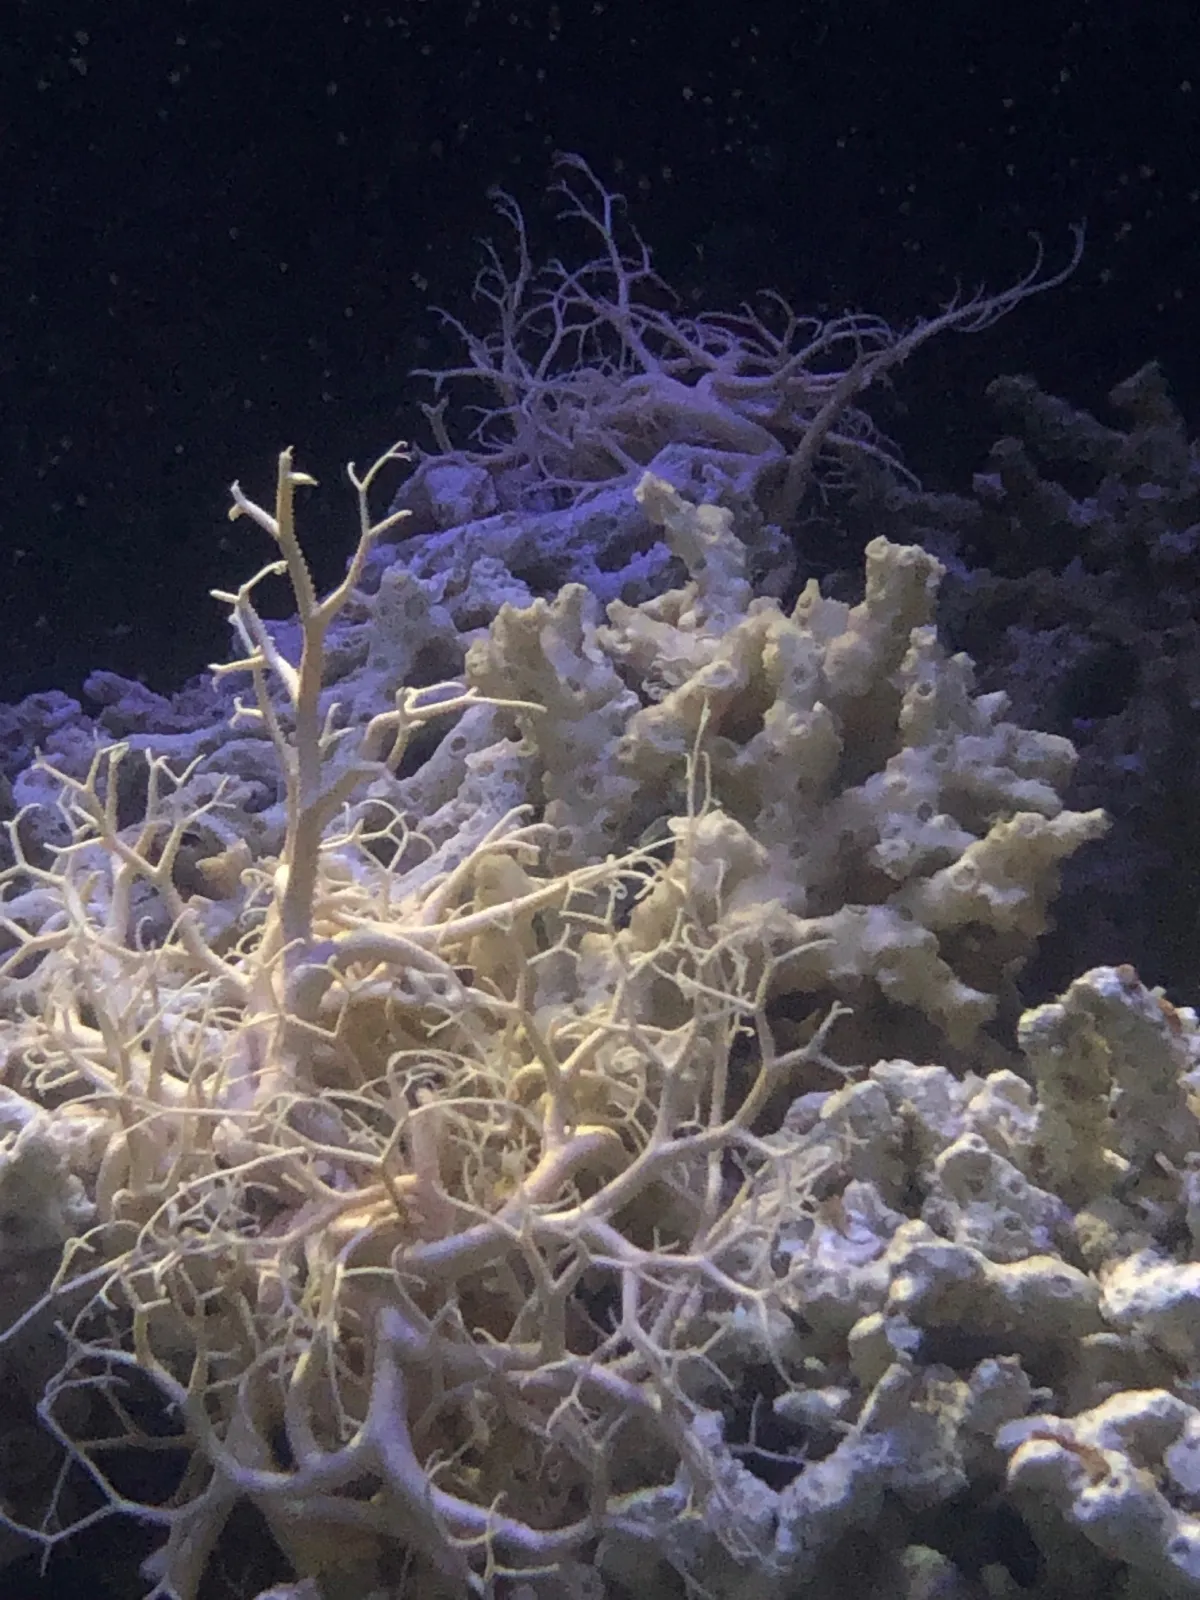 Basket Star among the corals